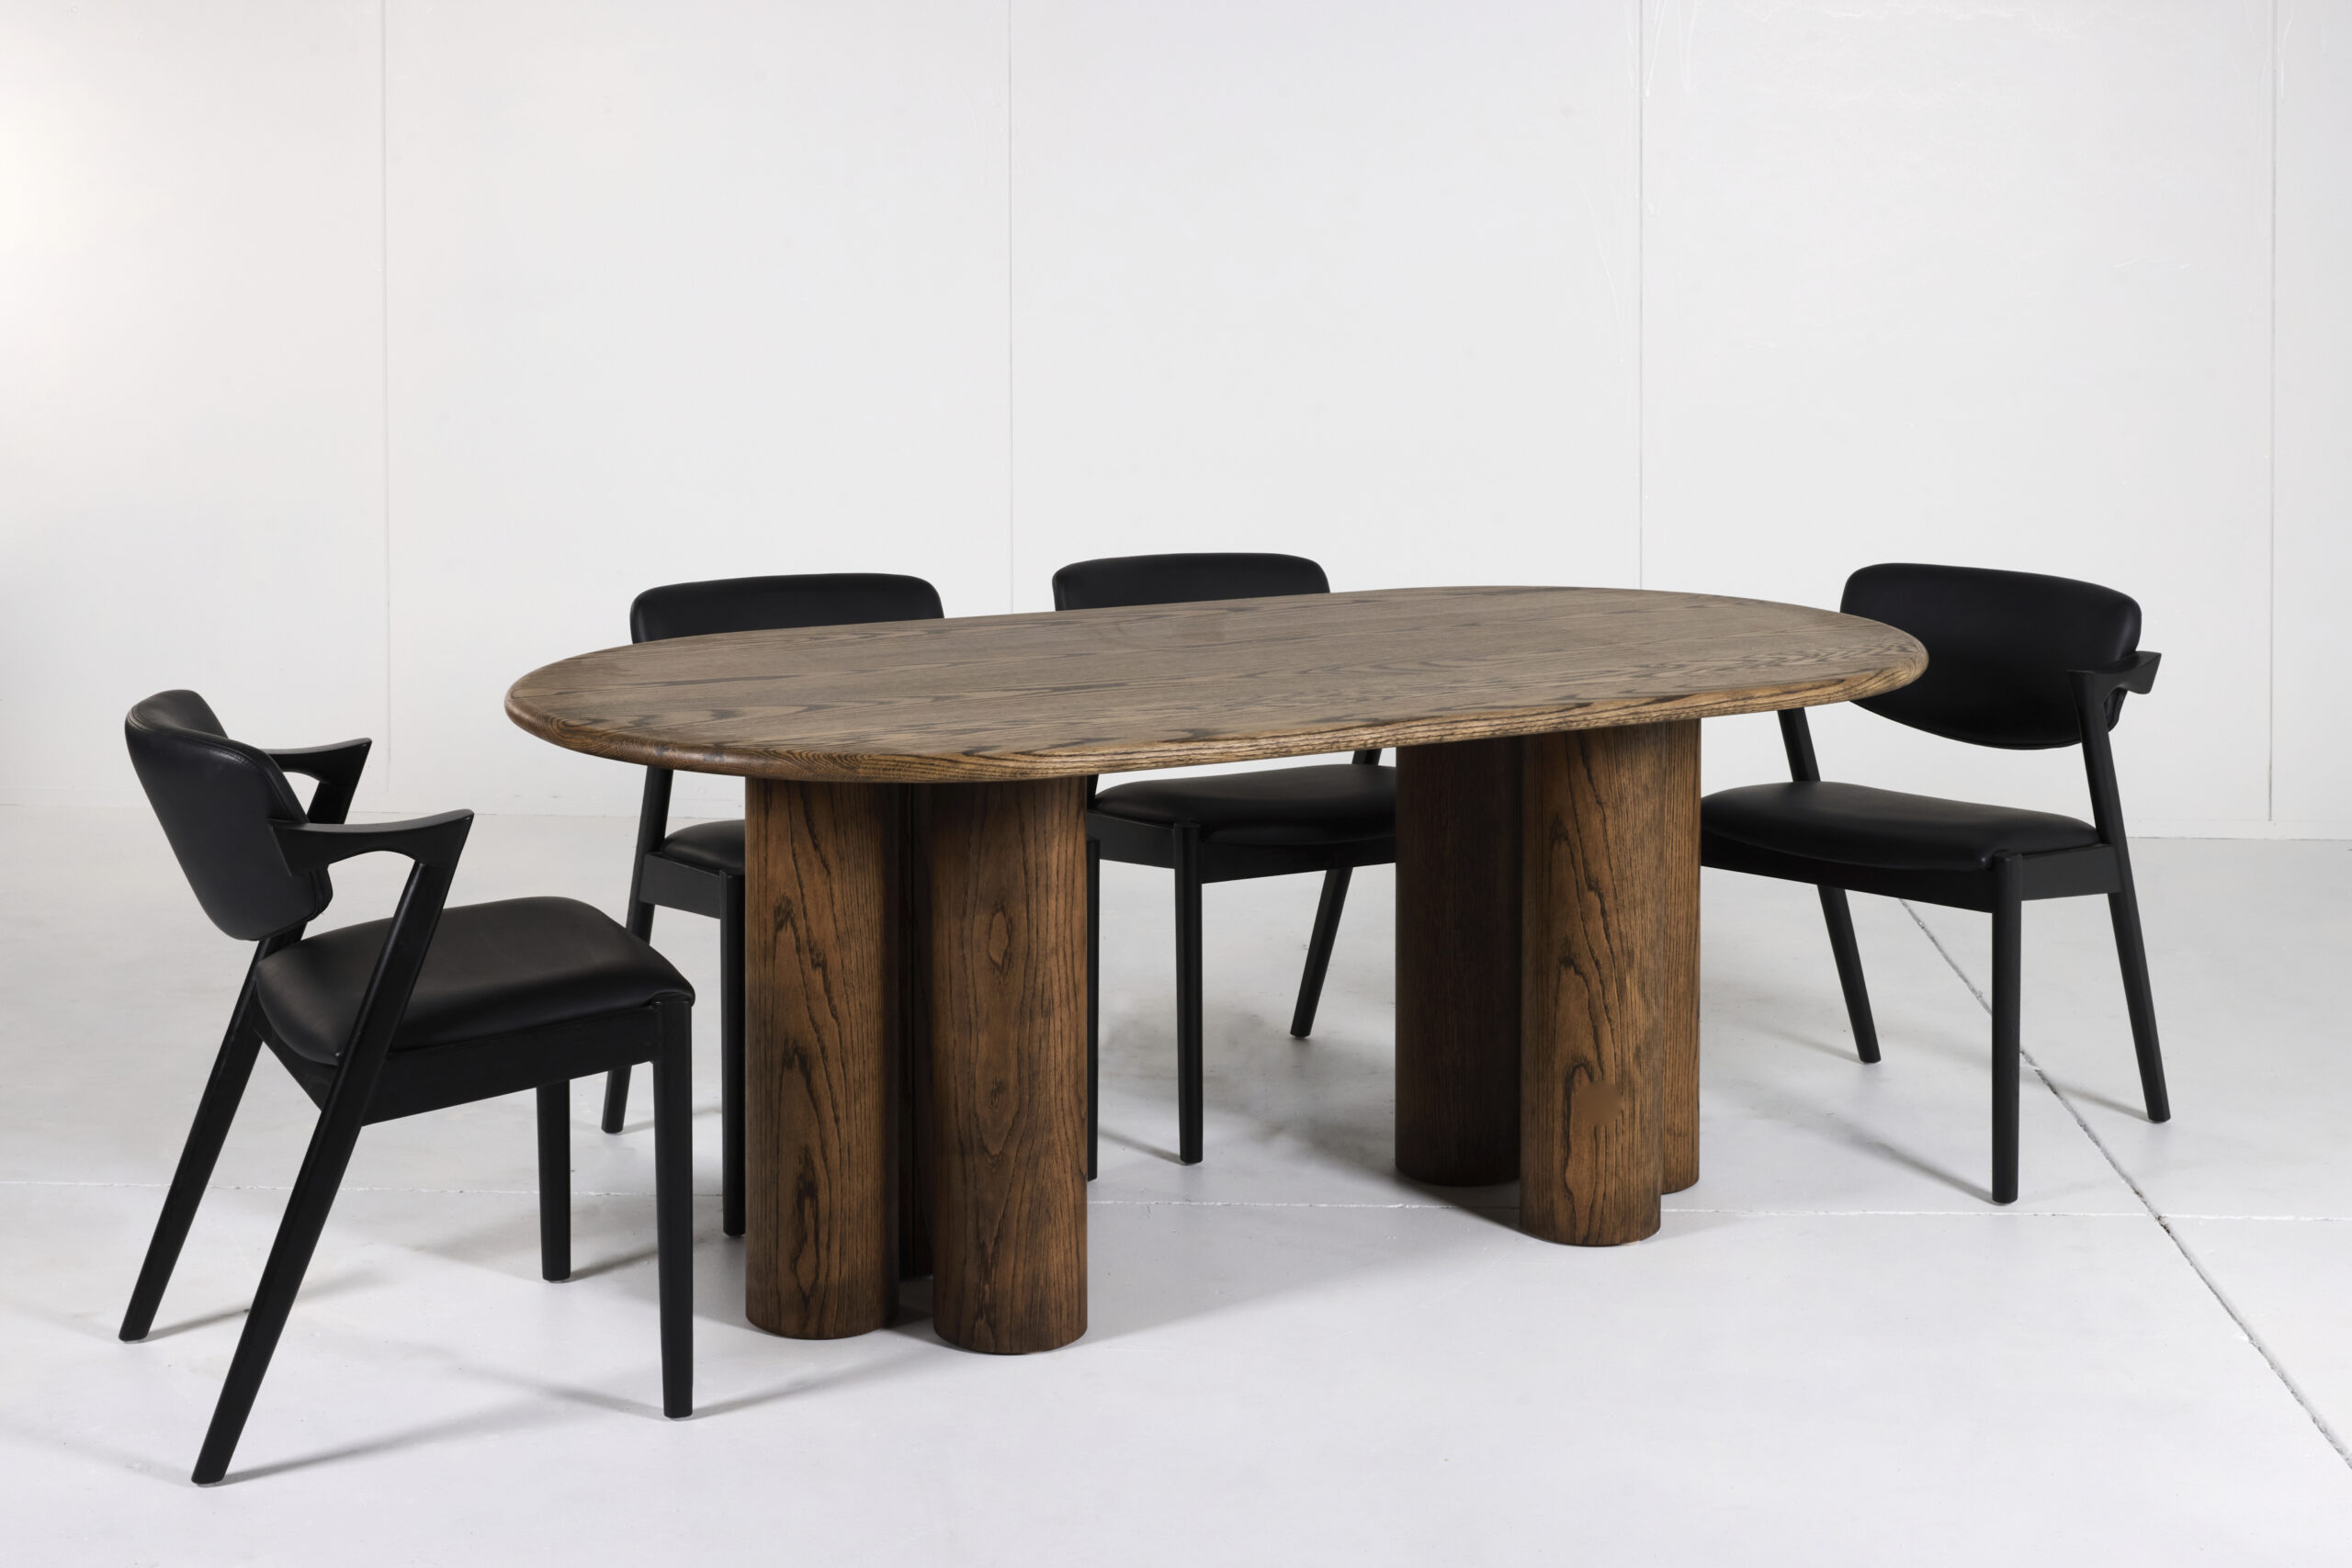 Pillar Dining Table crafted from premium timber with a sleek pencil edge and sturdy pillar base.